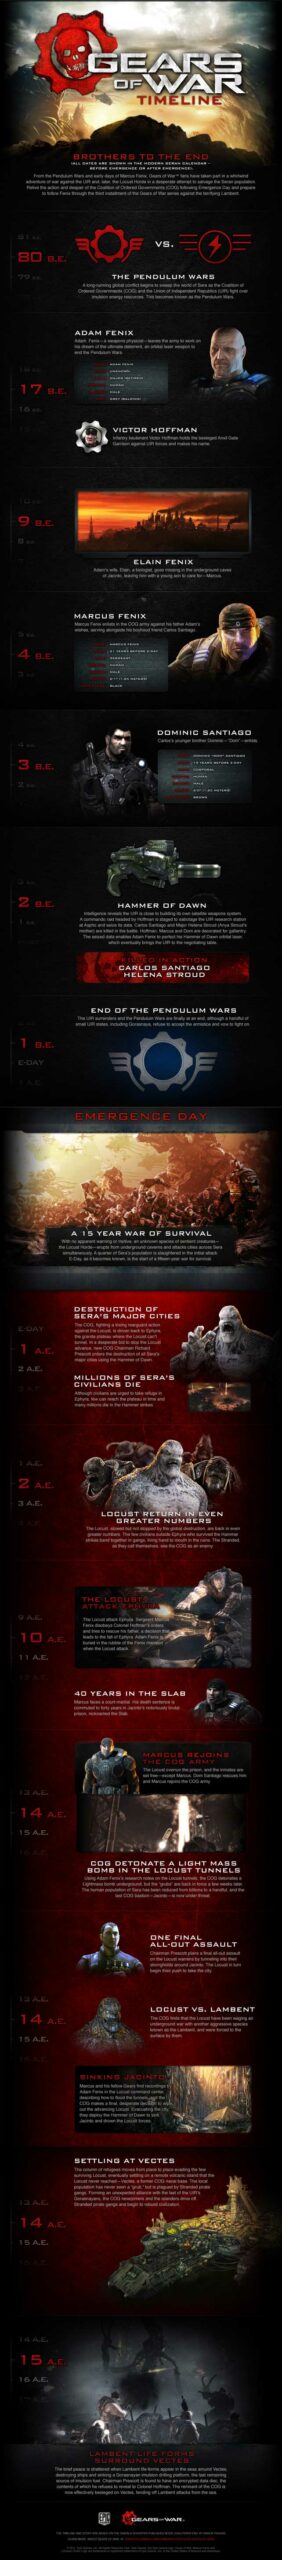 thoughtsgearsofwartimelineinfographic